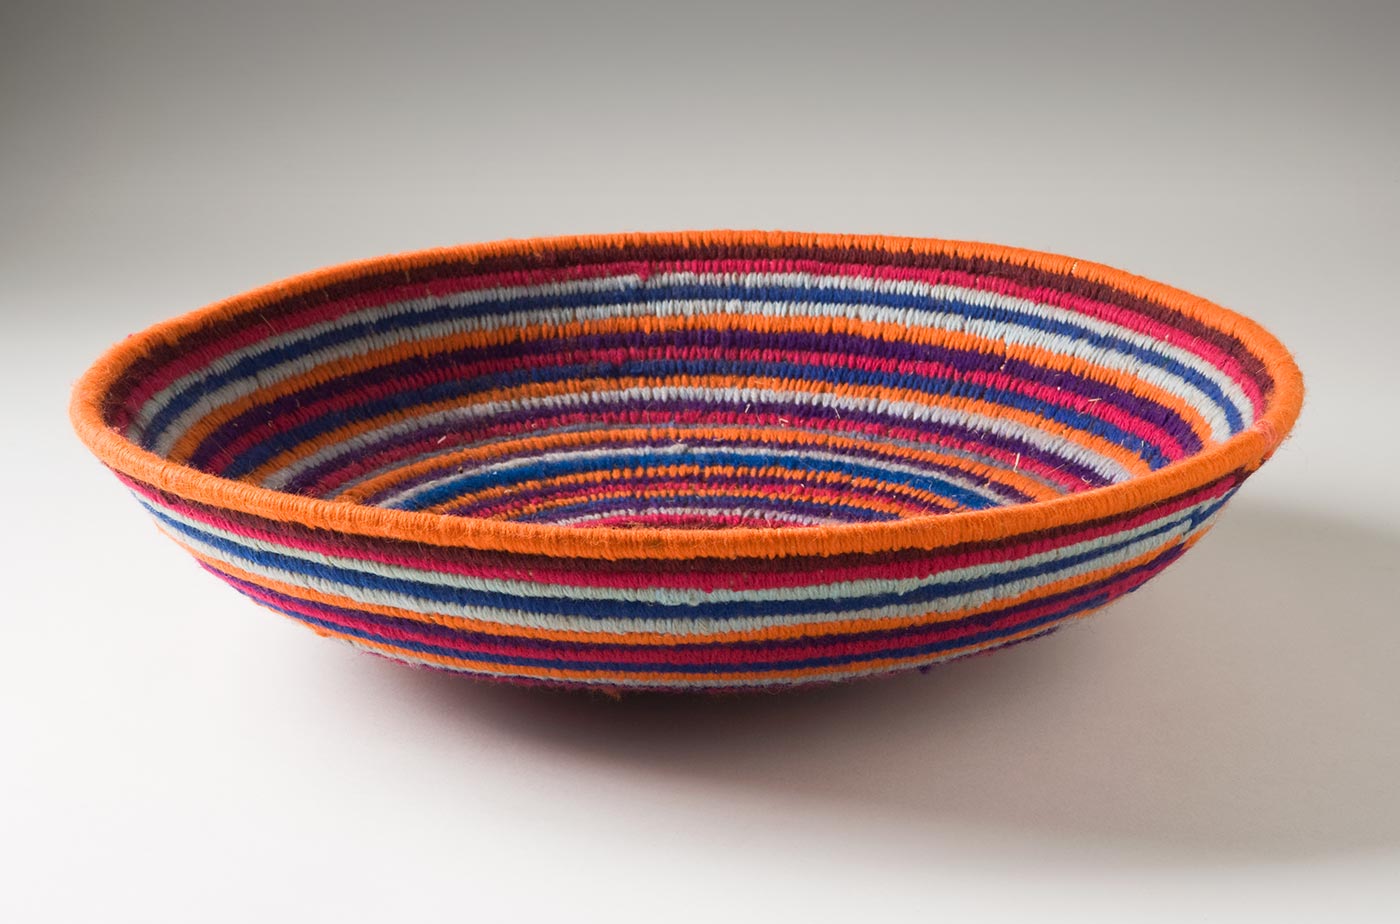 A multi-coloured circular coiled bowl-shaped basket made of yarn and plant fibre. The centre of the basket is in orange yarn followed by horizontal stripes of yarn in dark pink, purple, grey, blue, brown and orange. - click to view larger image